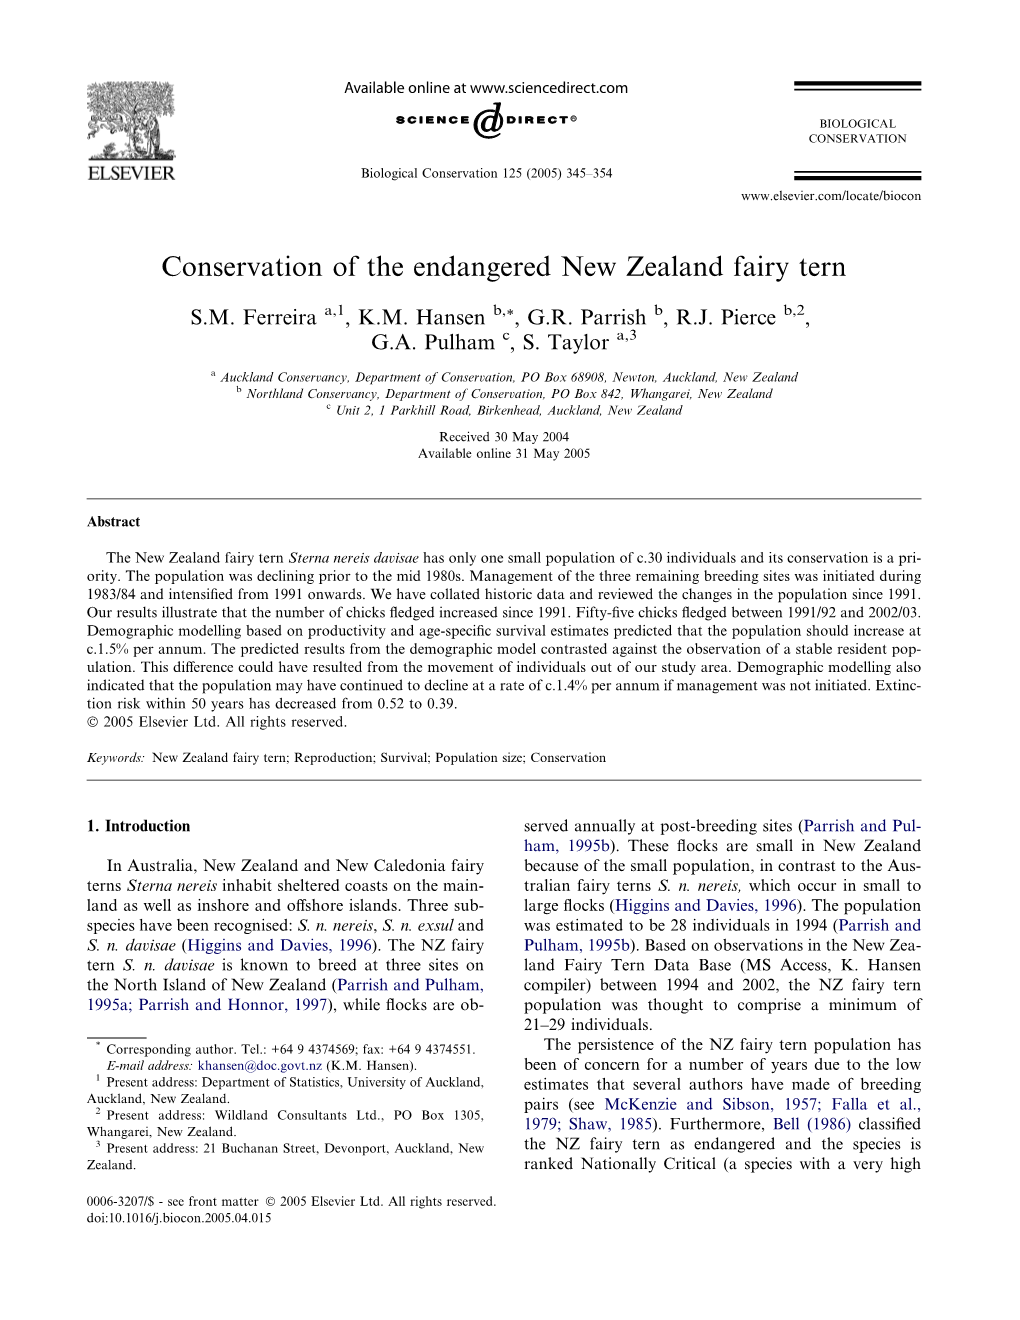 Conservation of the Endangered New Zealand Fairy Tern